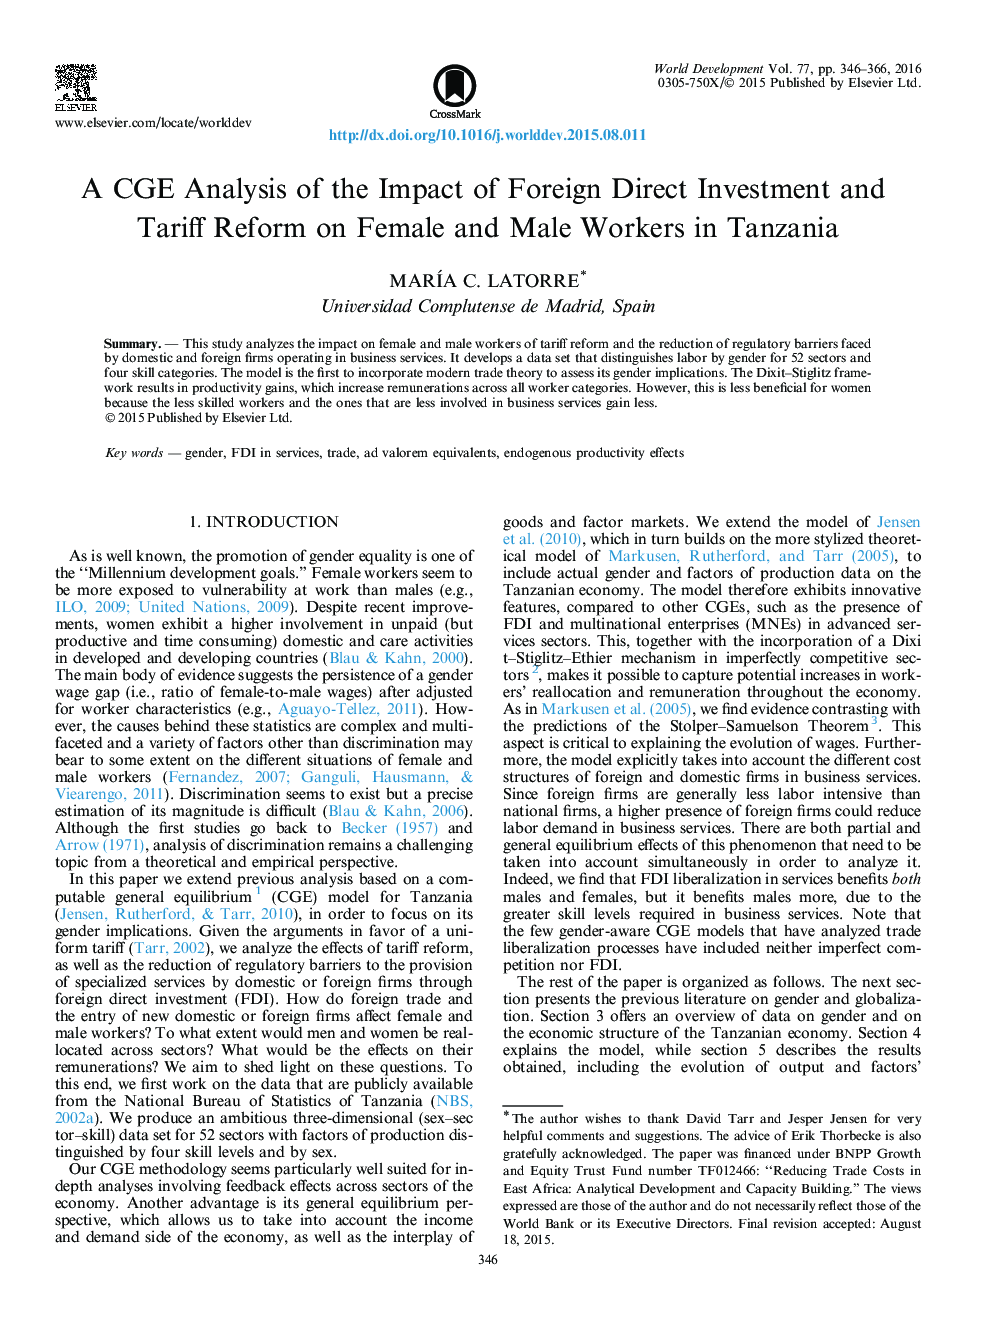 A CGE Analysis of the Impact of Foreign Direct Investment and Tariff Reform on Female and Male Workers in Tanzania